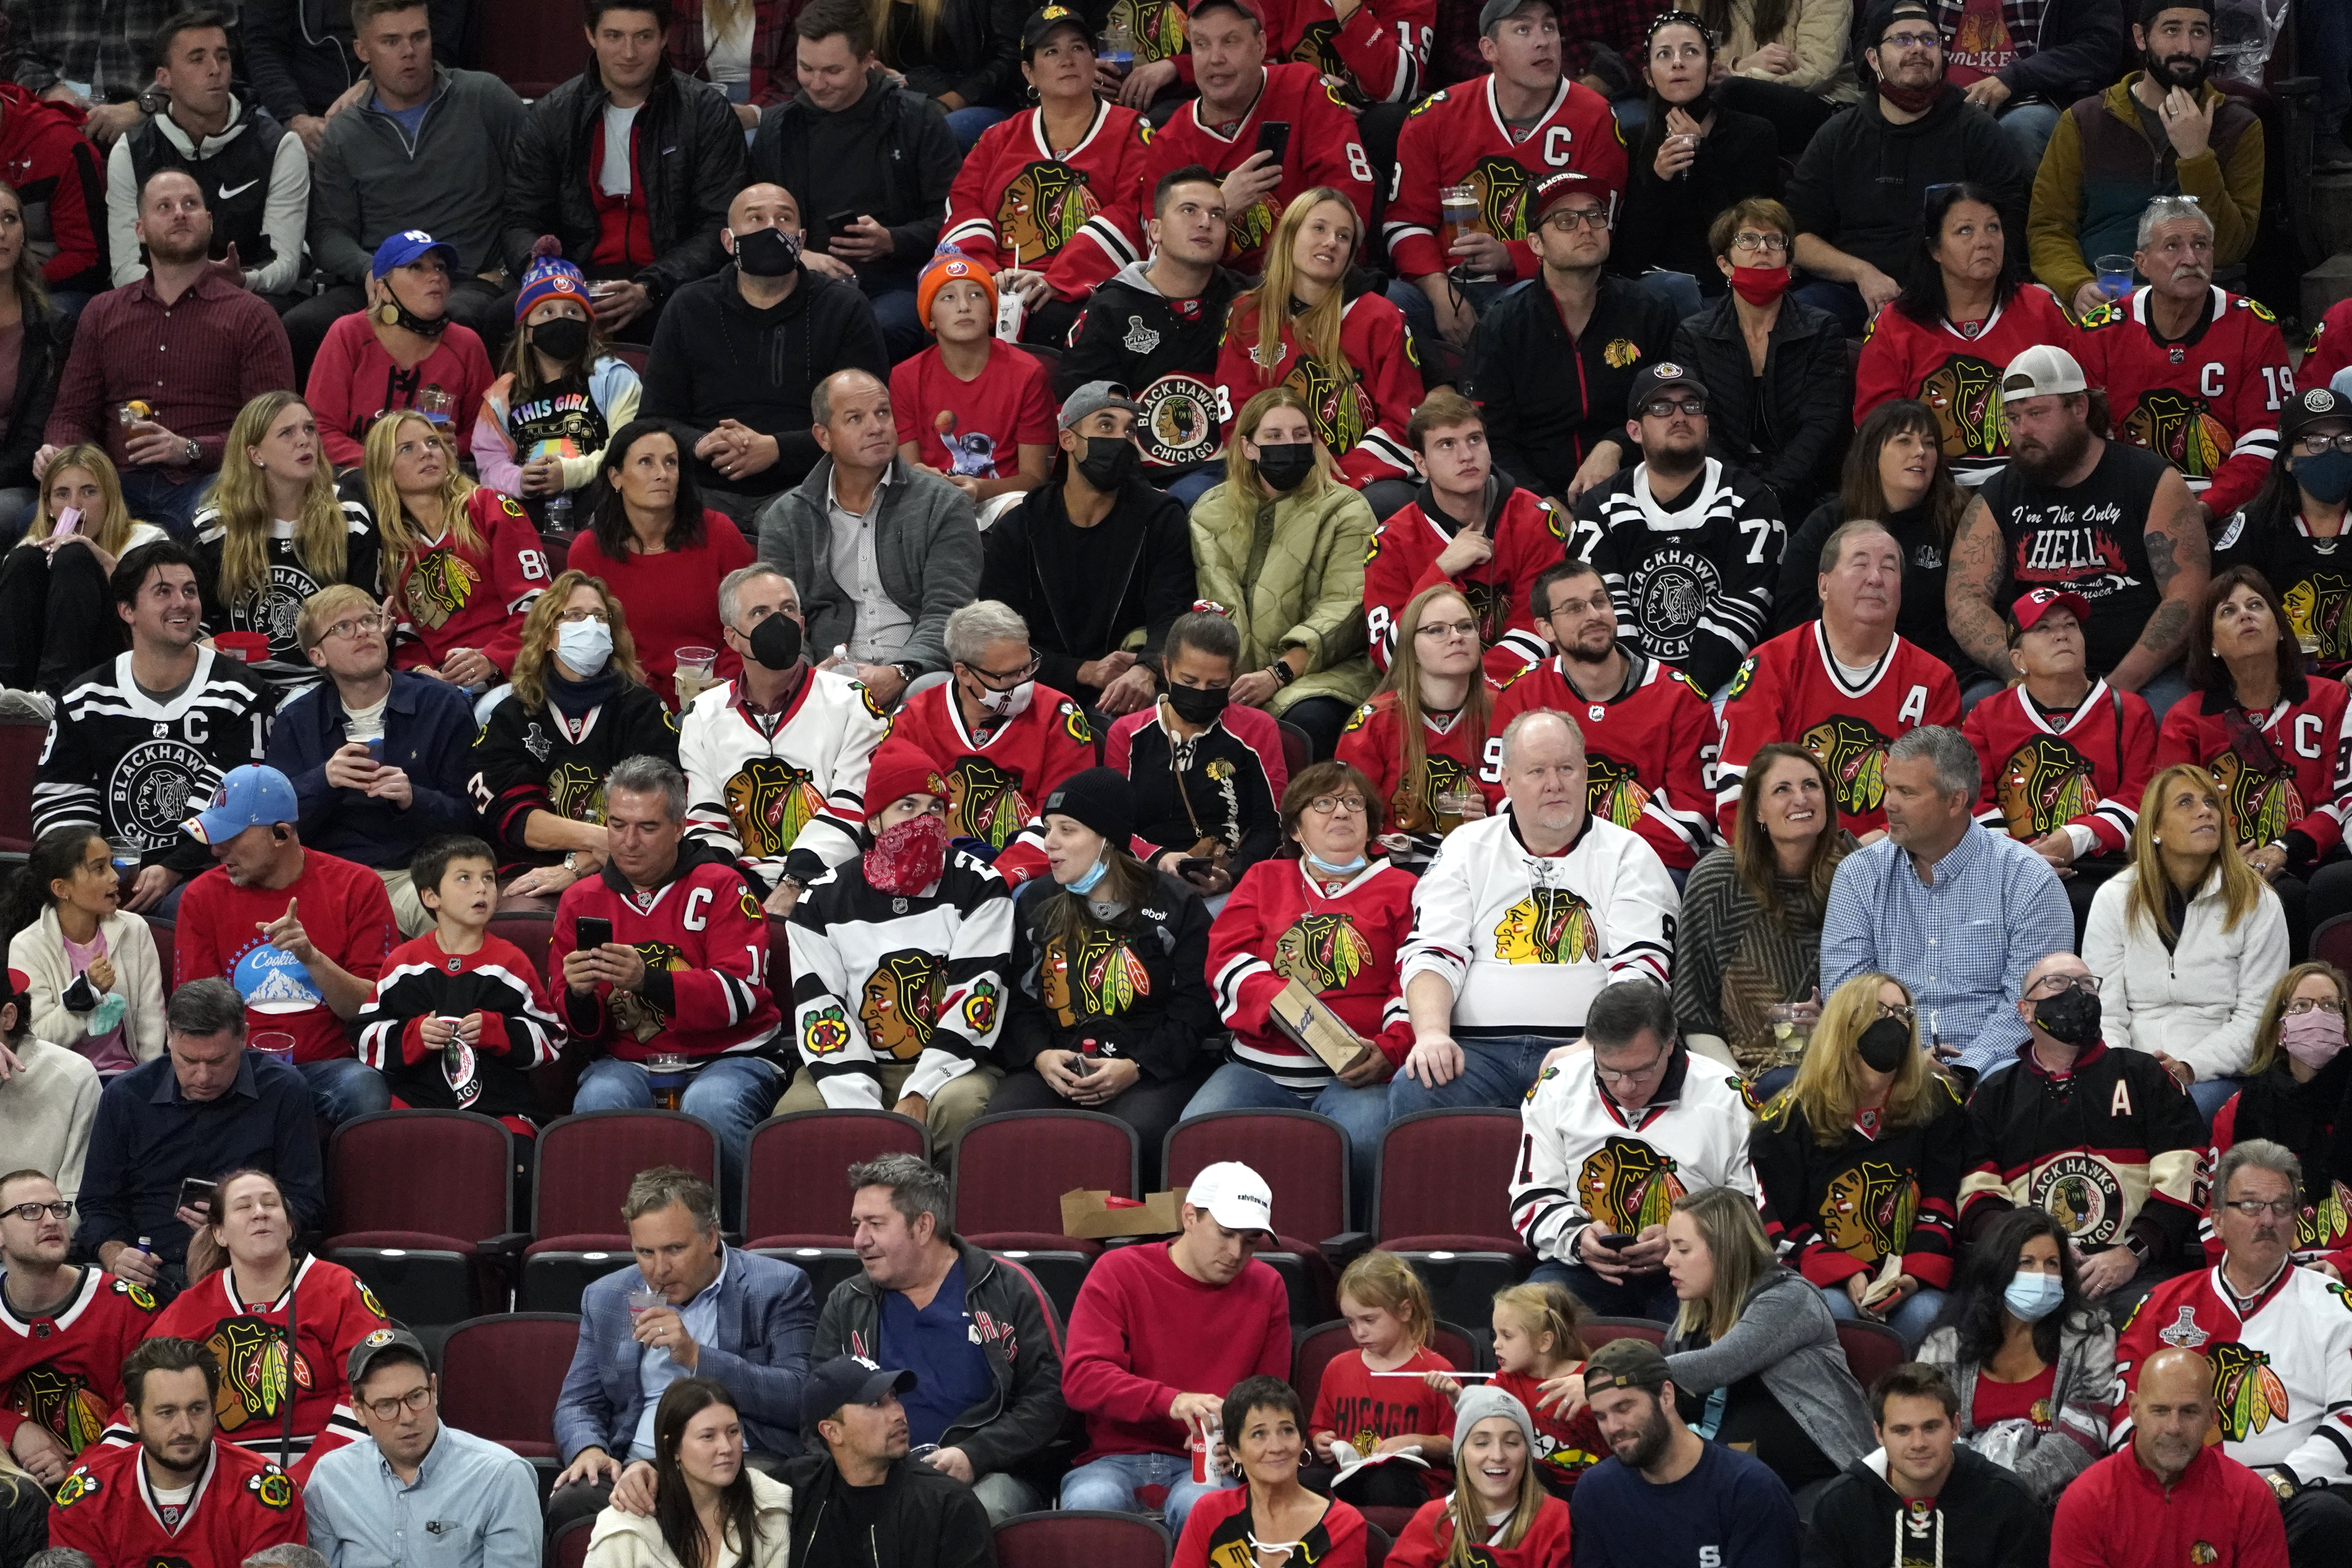 One way the NHL Lottery win is already having an impact on the Blackhawks